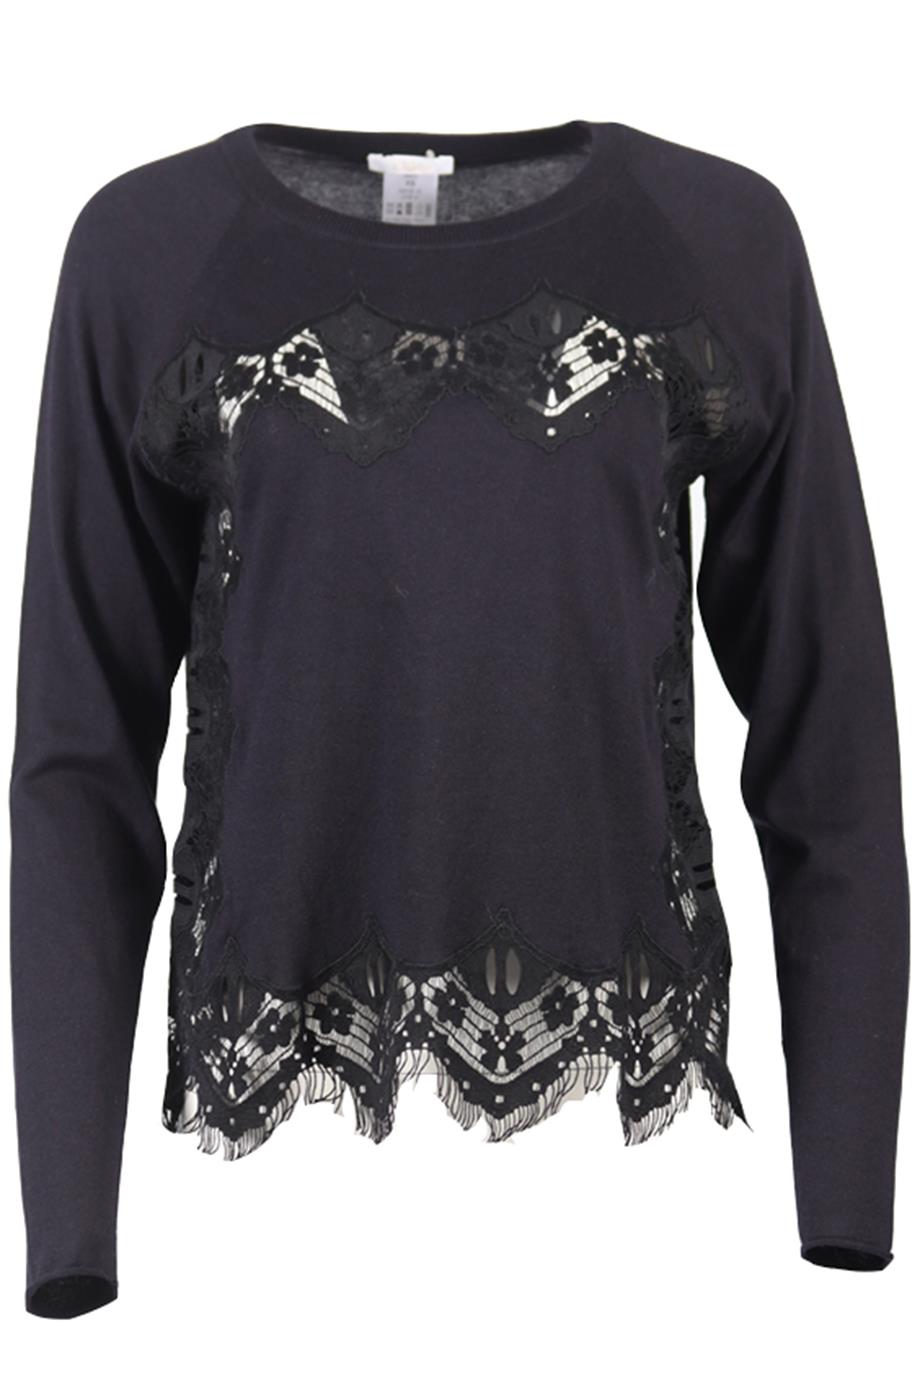 CHLOÉ LACE AND SILK BLEND SWEATER XSMALL